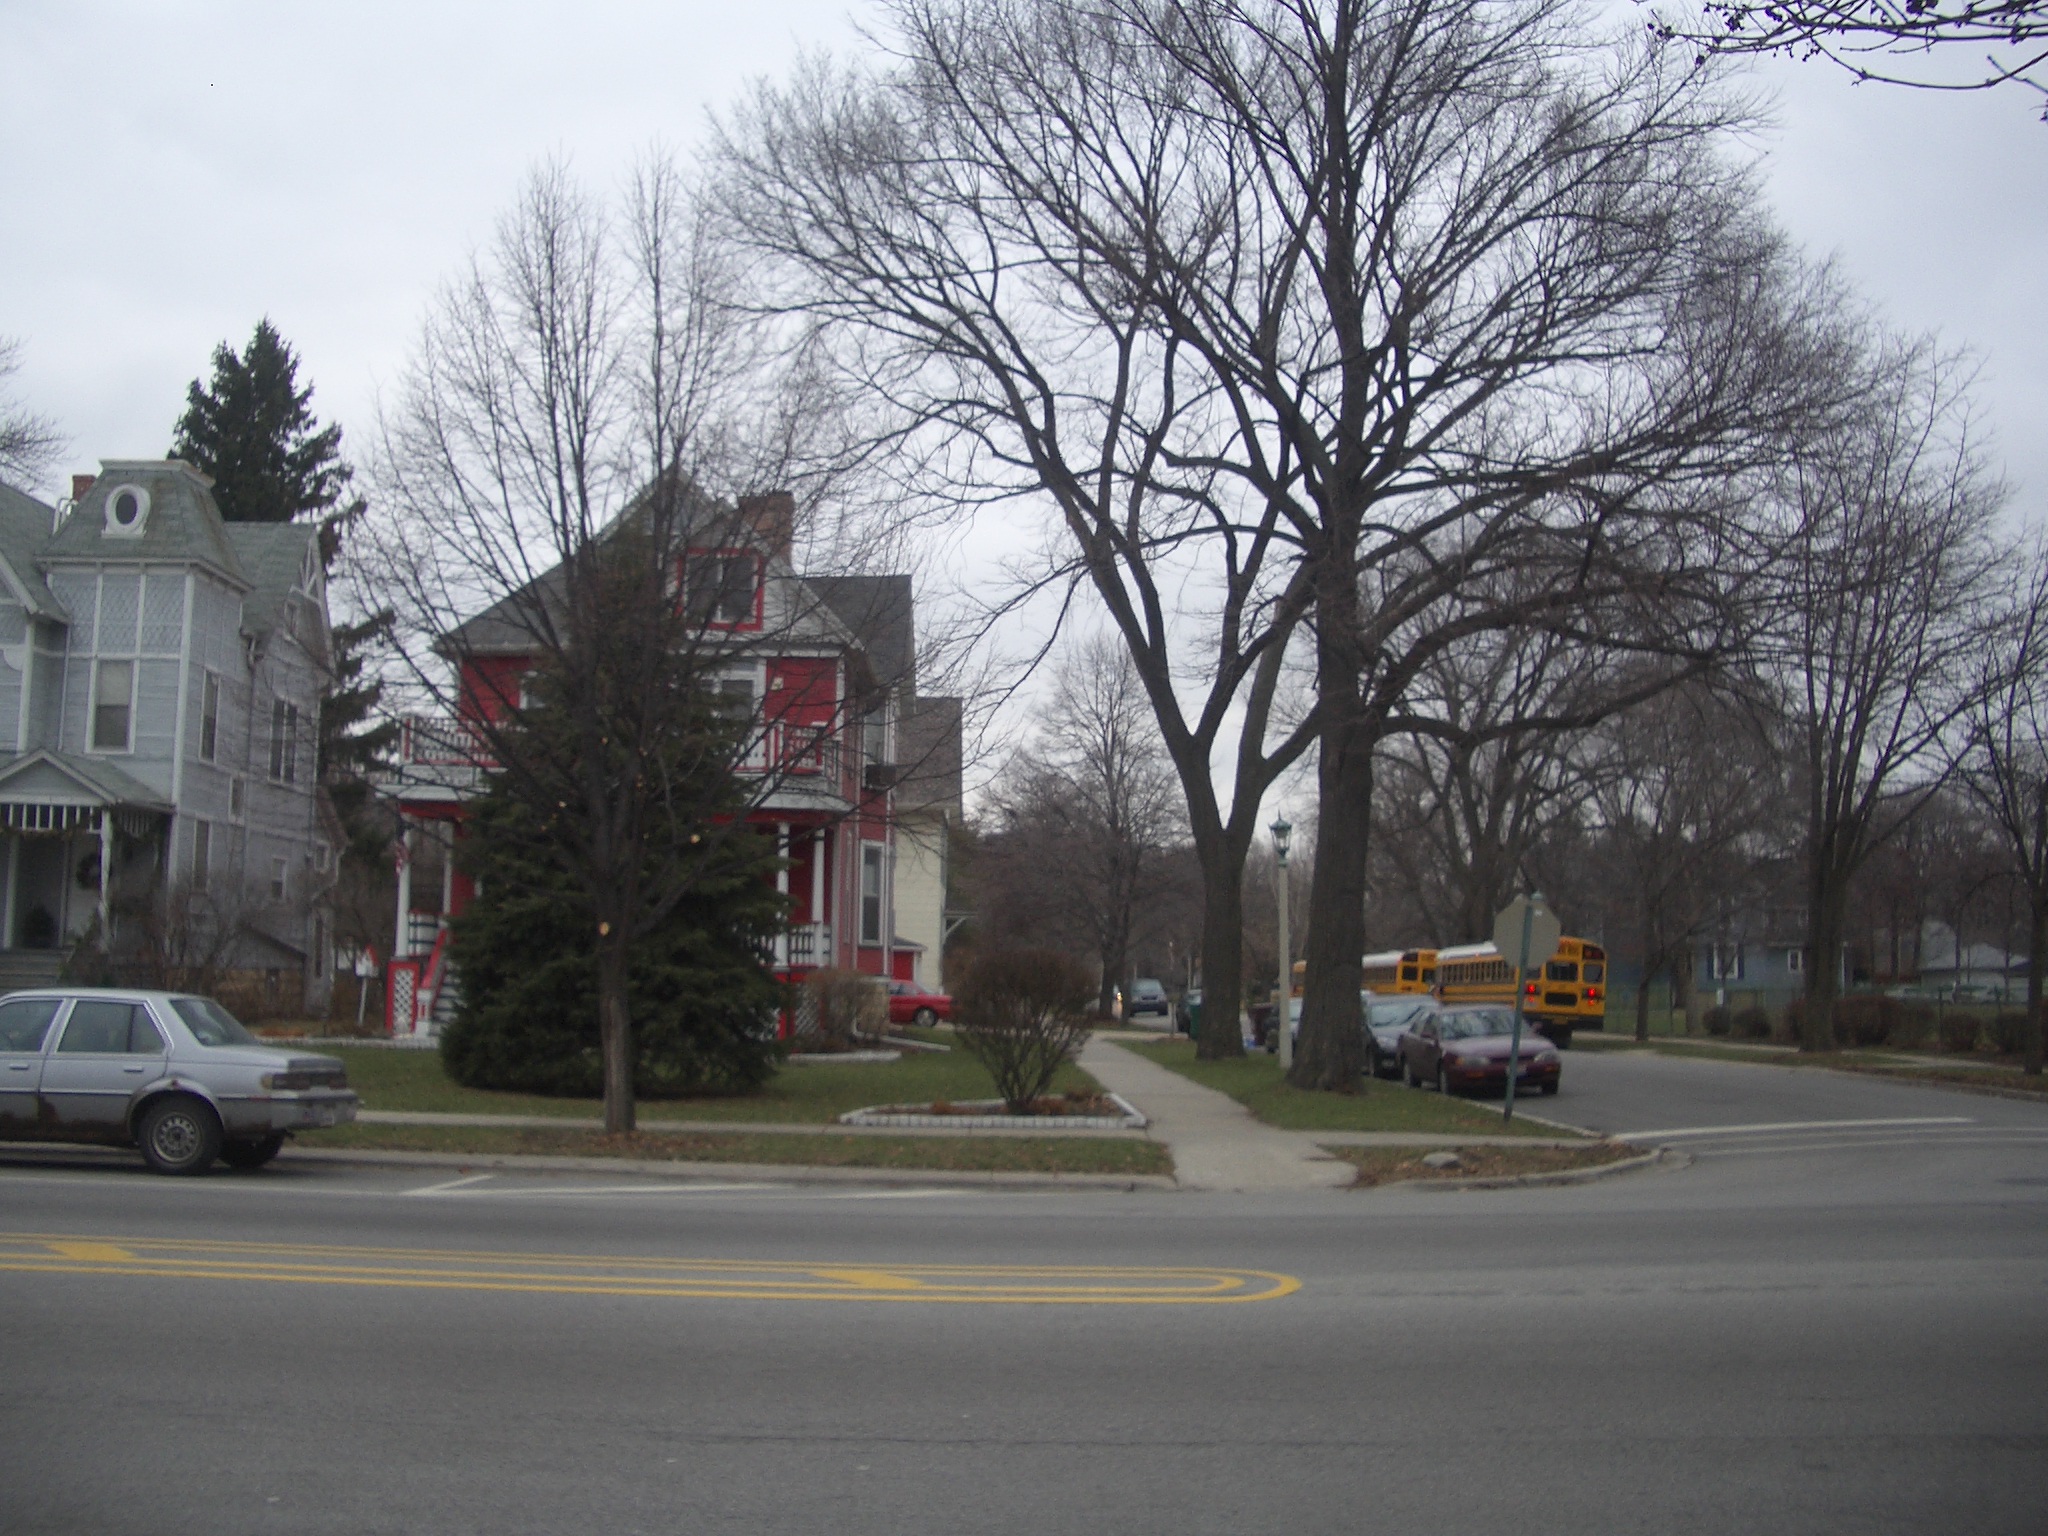 a street with parked cars and two school buses next to trees